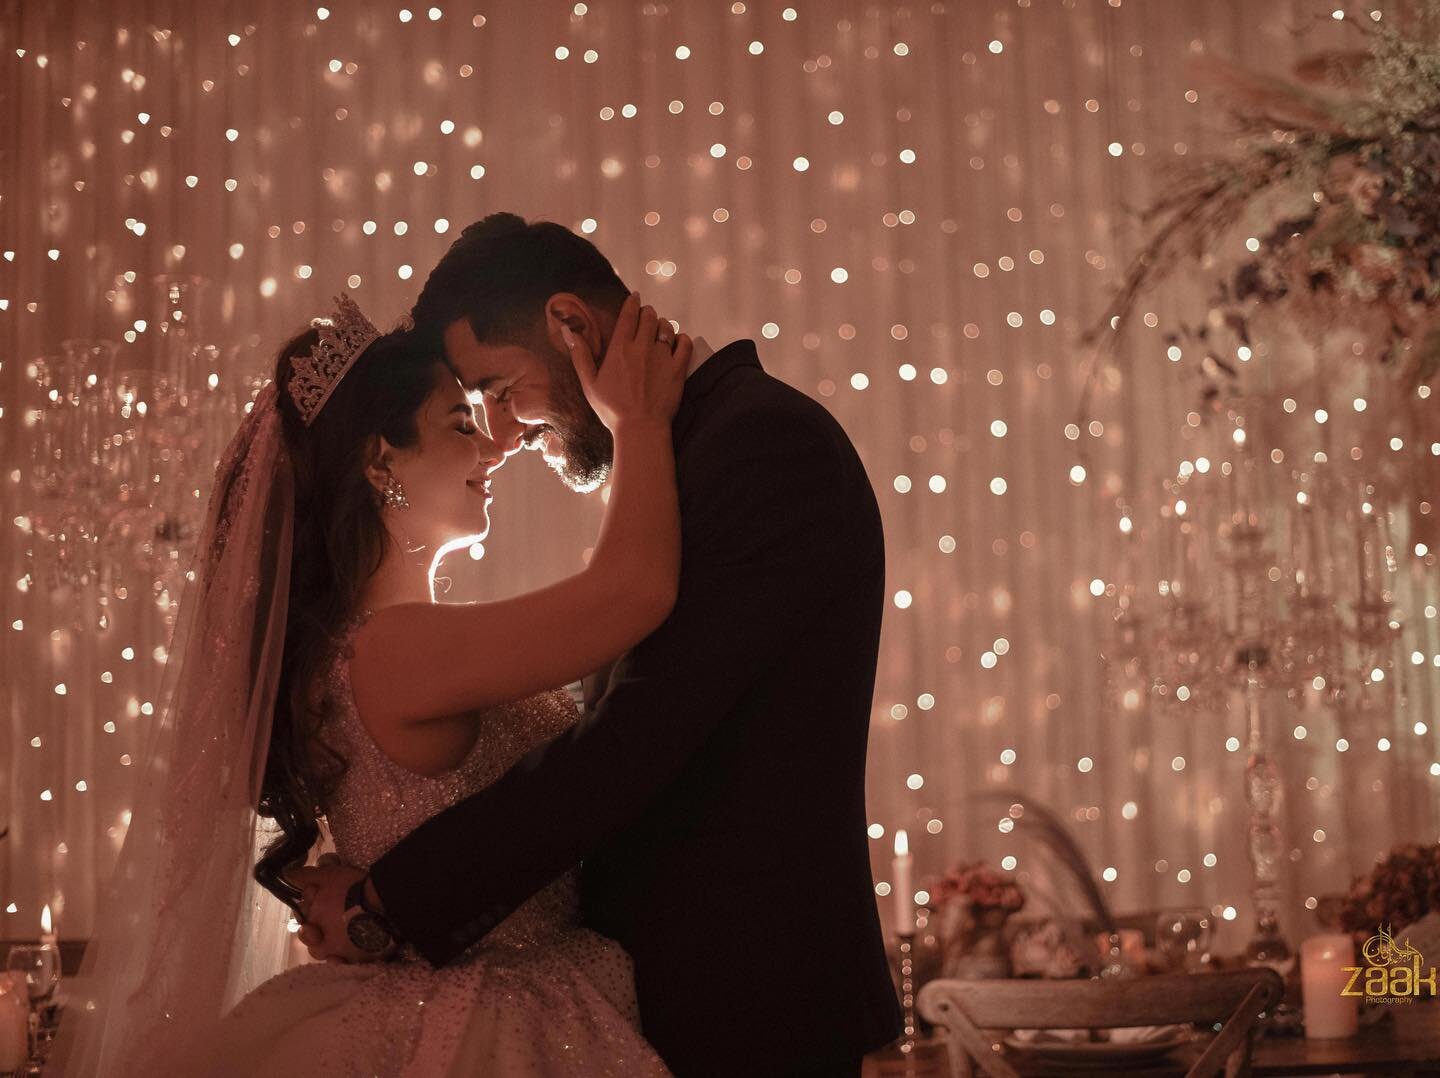 &lsquo;Coz you&rsquo;re a sky full of stars, I&rsquo;m gonna give you my heart&rsquo; ❤️ 
I absolutely loved being a part of @rossaa.03 intimate wedding..a beautiful couple and family that was an absolute delight to work with.. 
❤️❤️❤️
Xox 
Zahra 
Ph